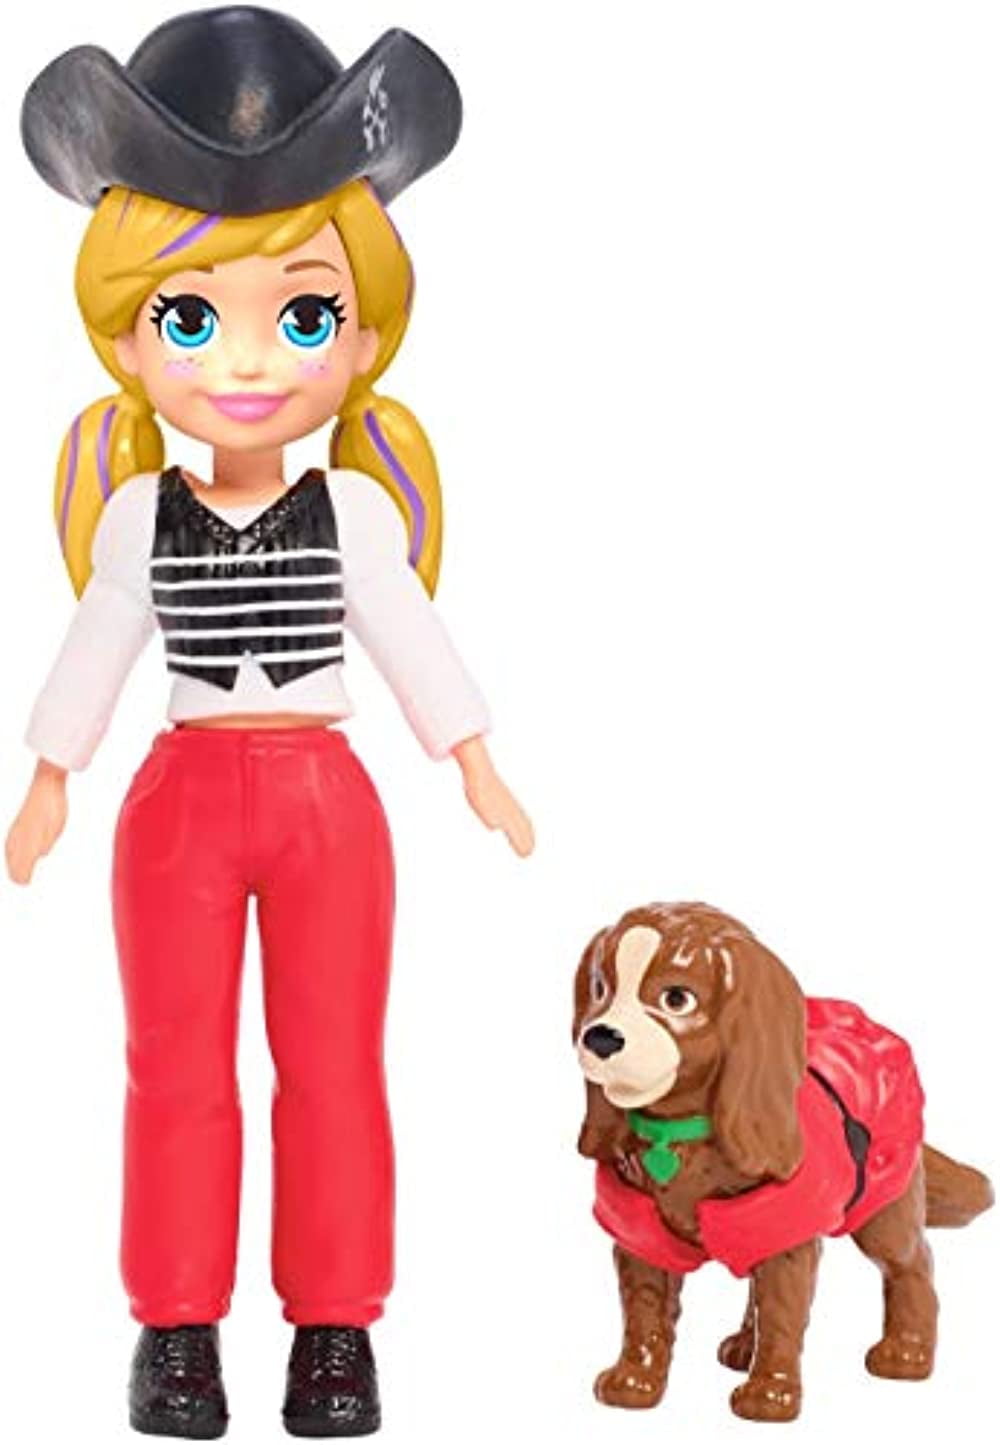 2019/2020 PET GROOMER Doll Career Fashion Pack New 